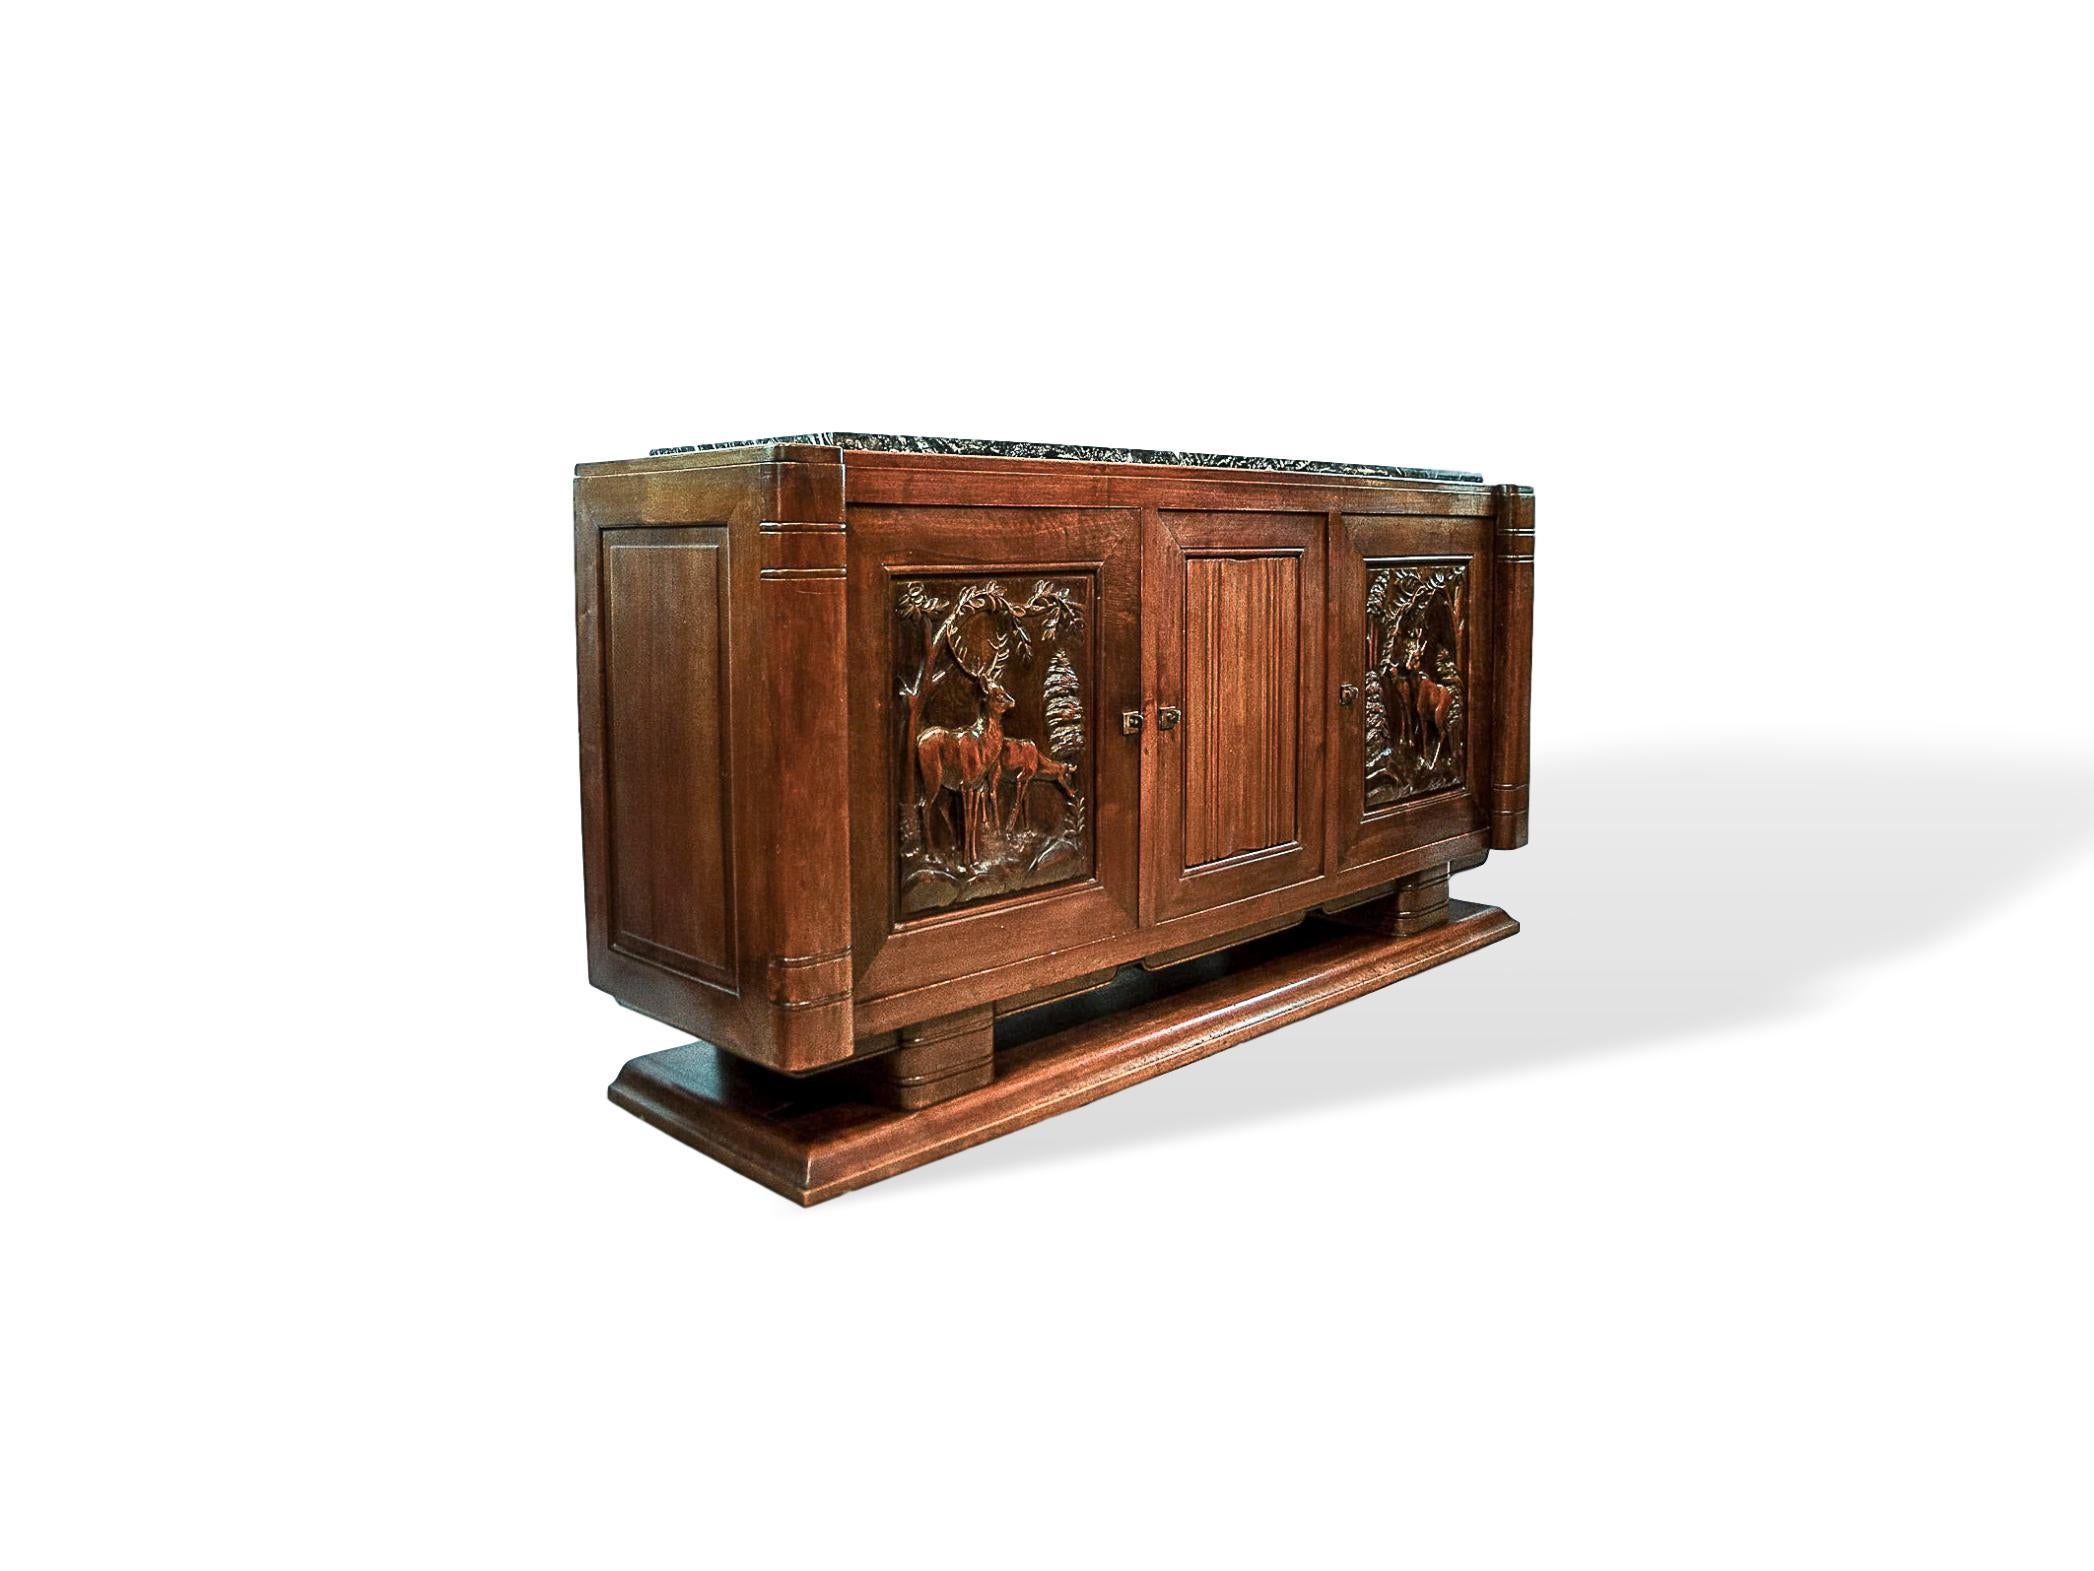 Hand-Carved Rare Art Deco Midcentury Solid Walnut Credenza Sideboard, French, circa 1930